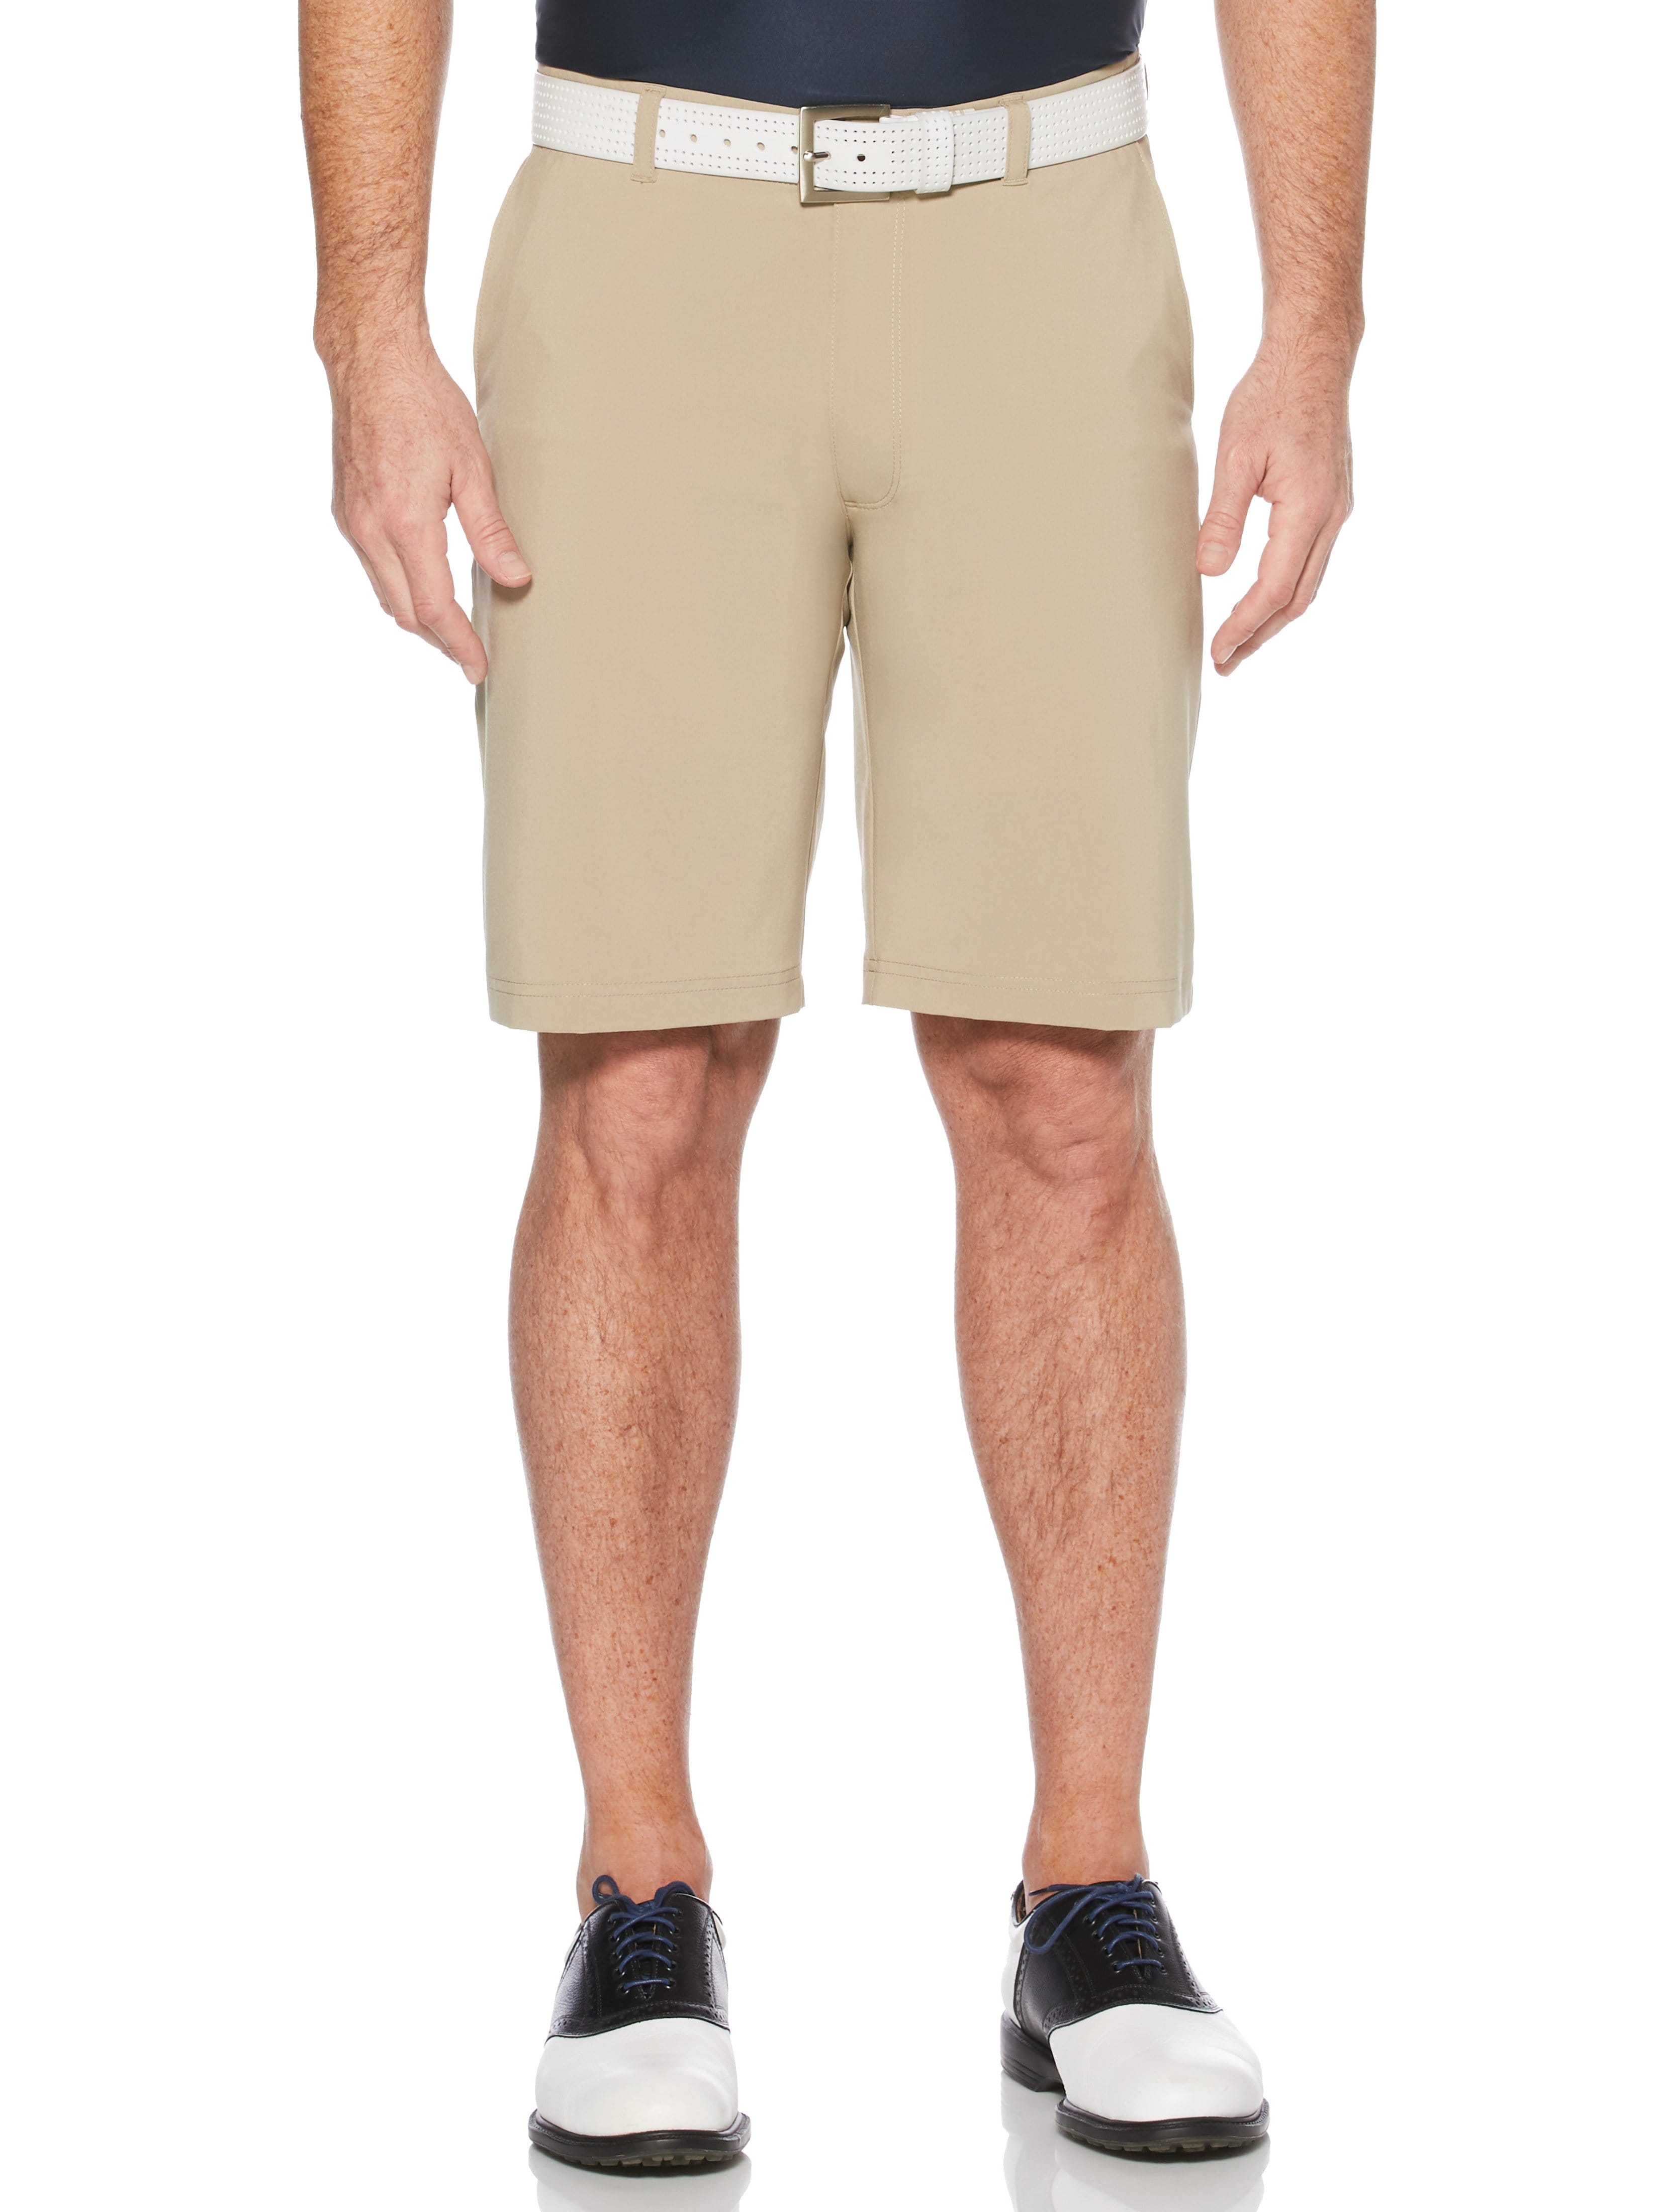 Jack Nicklaus Mens Flat Front Solid Golf Shorts w/ Active Waistband and Media Pocket, Size 44, Chinchilla Beige, Polyester/Elastane